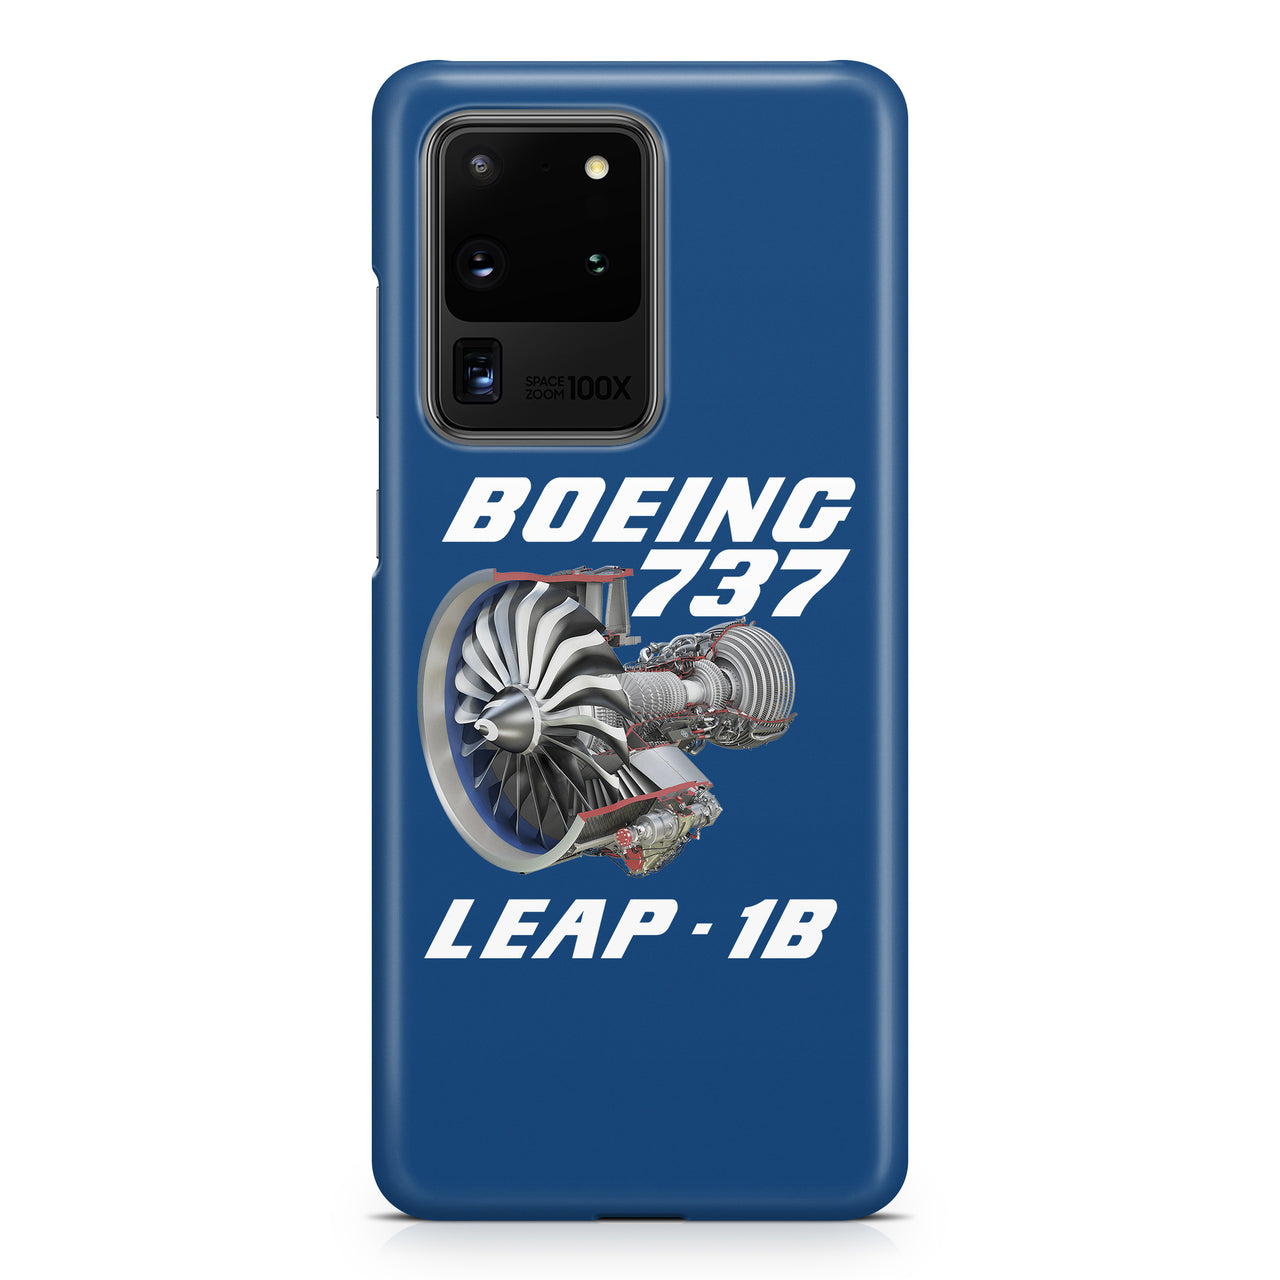 Boeing 737 & Leap 1B Samsung S & Note Cases